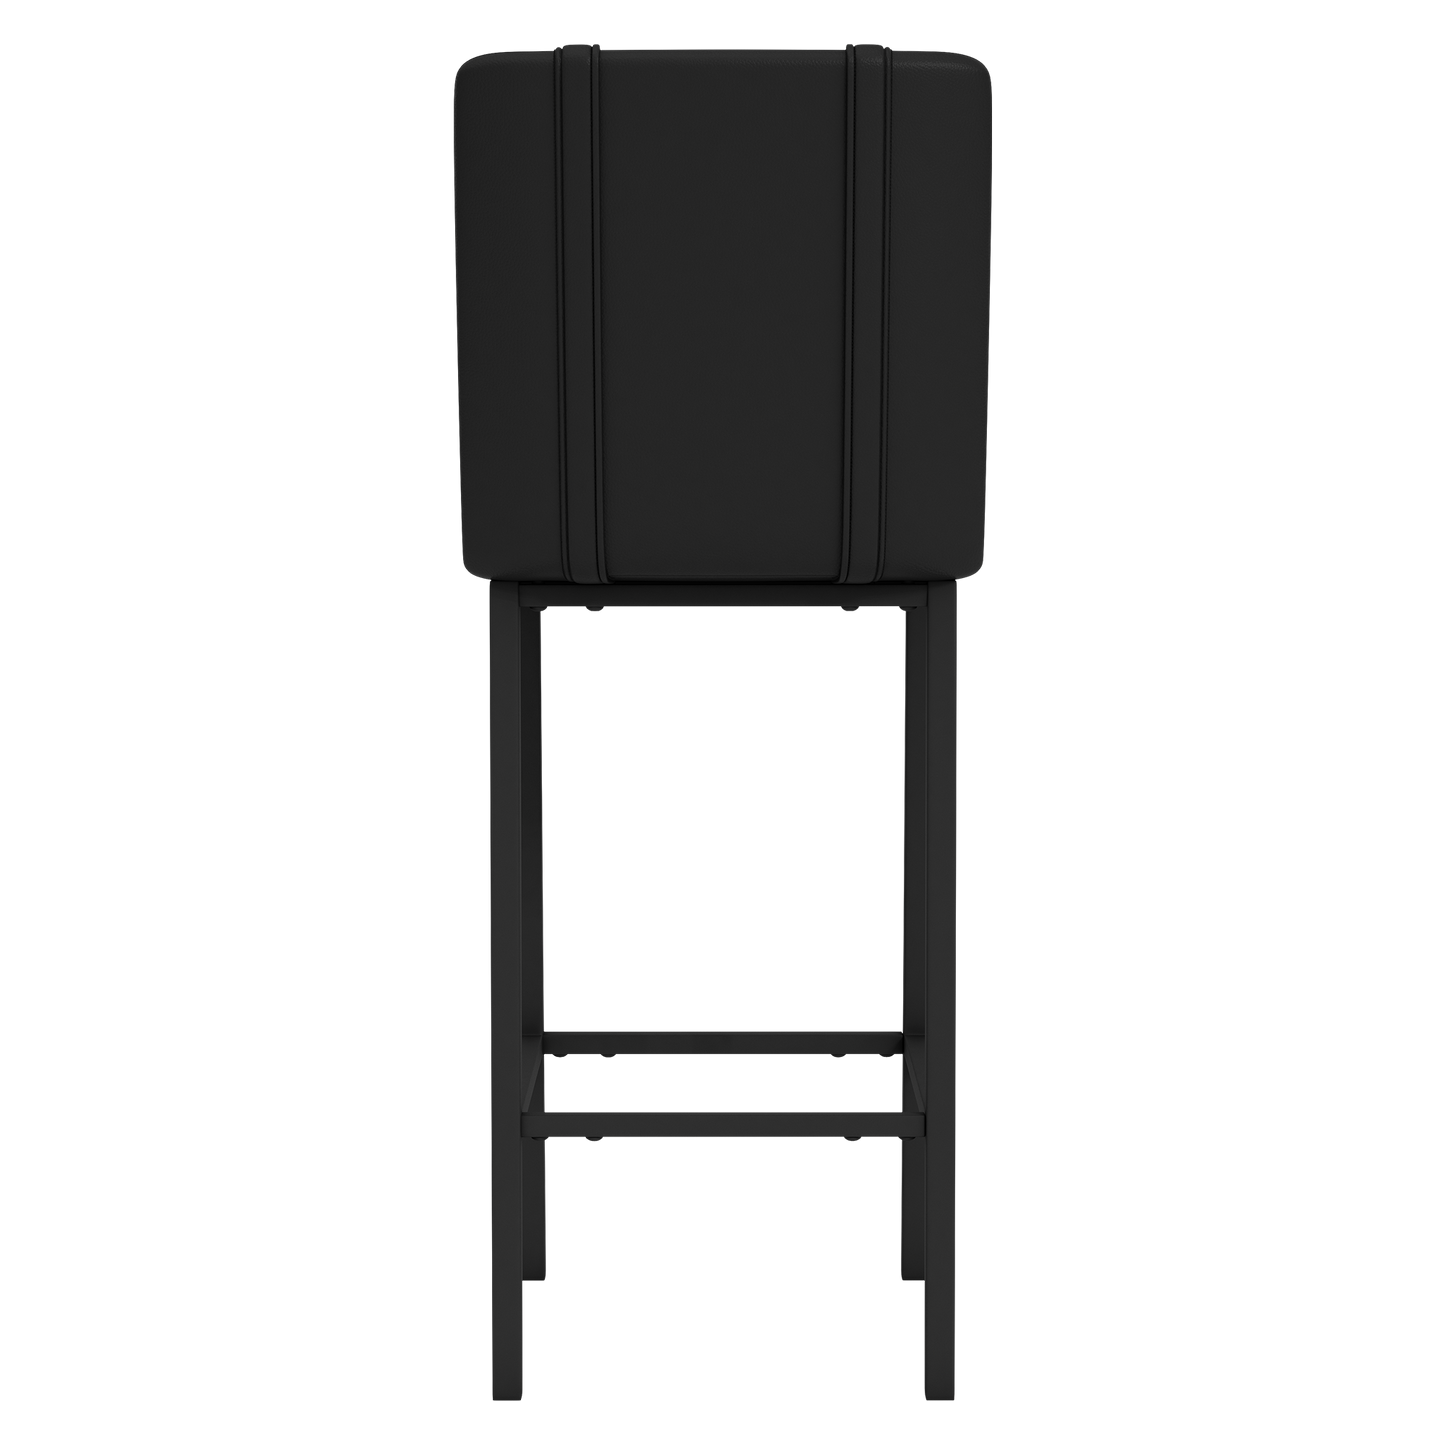 Bar Stool 500 with Indiana Pacers Logo Set of 2